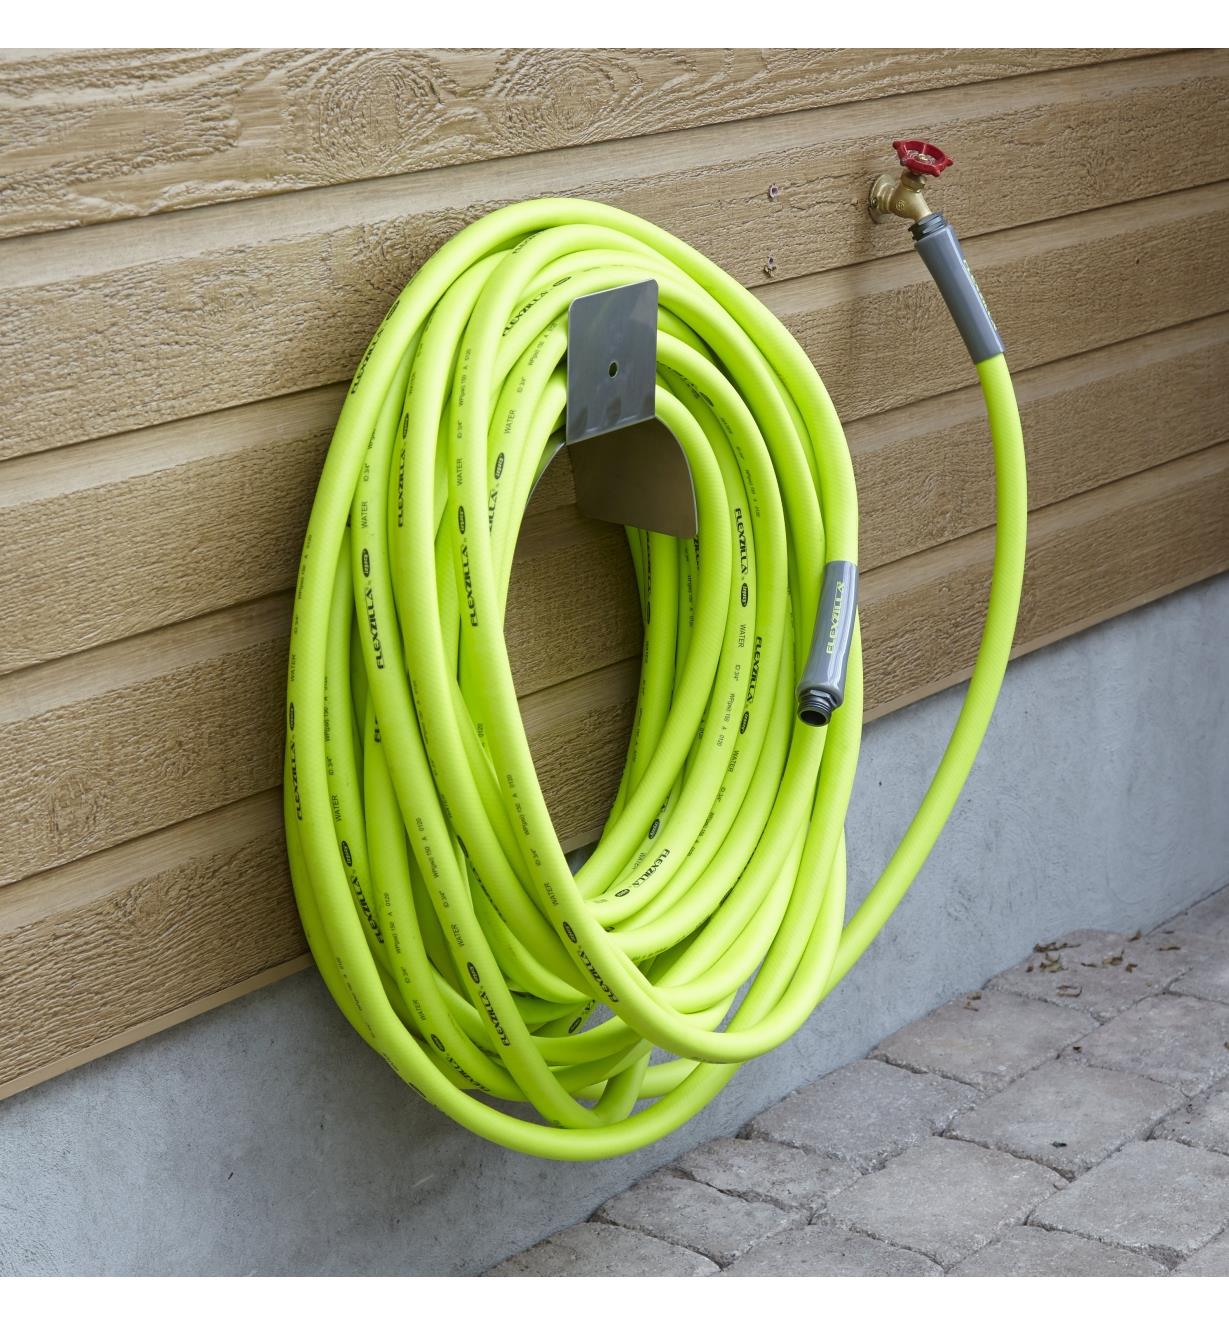 A 100' hose is coiled and hanging on an outdoor wall